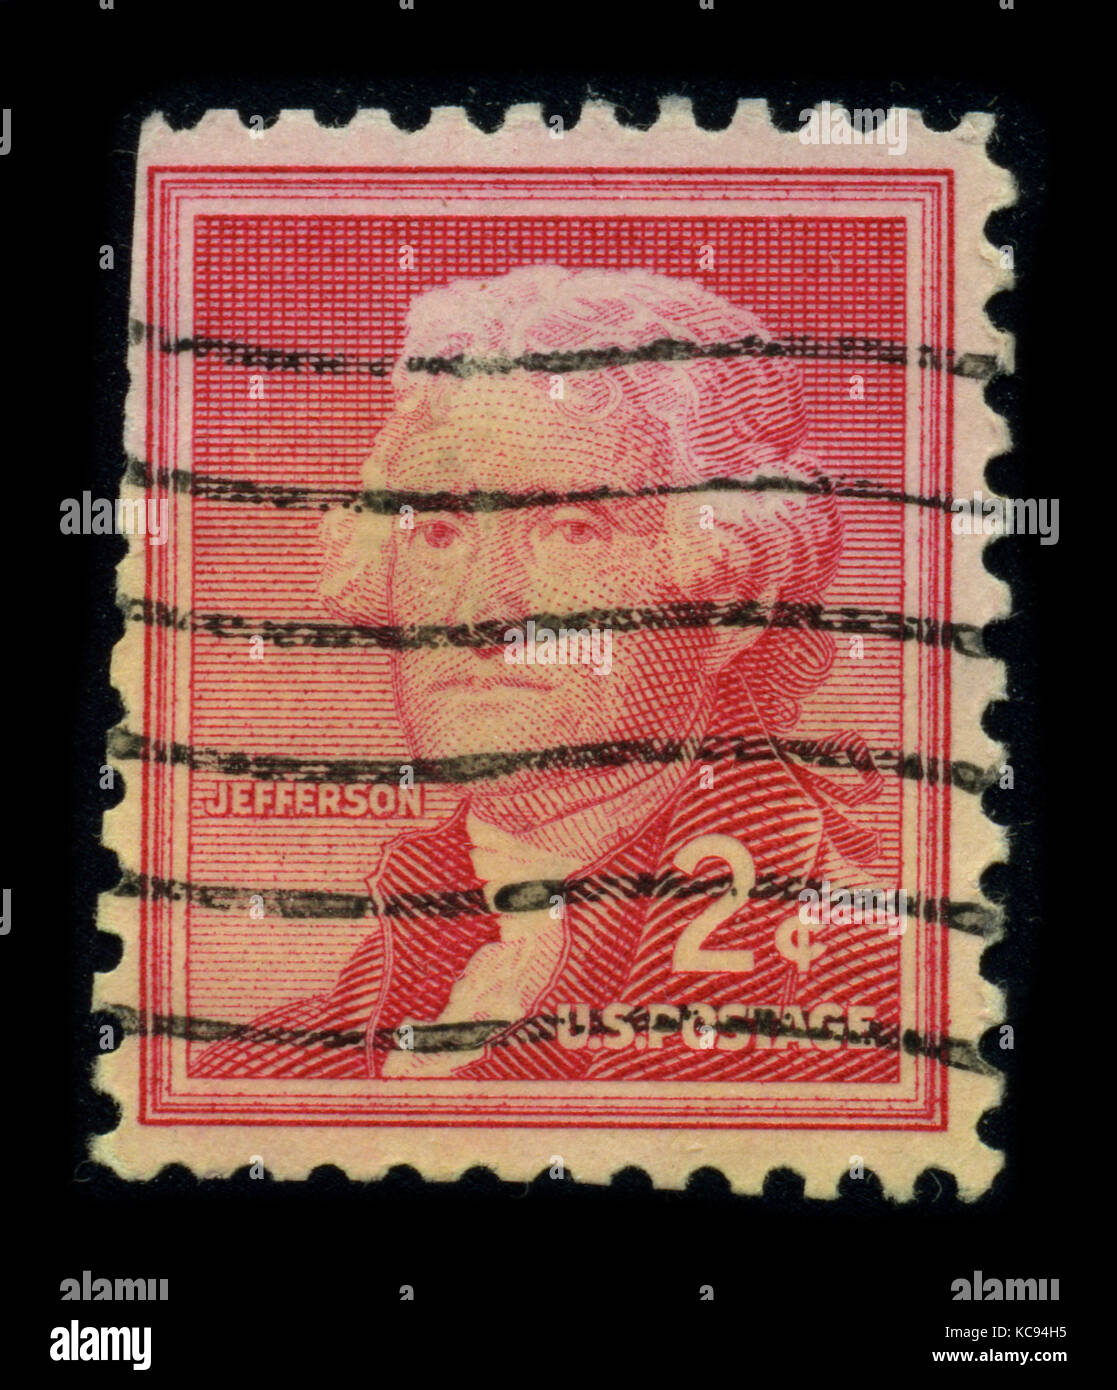 USA - CIRCA 1930: A stamp printed in USA shows image portrait Thomas Jefferson (April 13, 1743 - July 4, 1826) was the third President of the United S Stock Photo